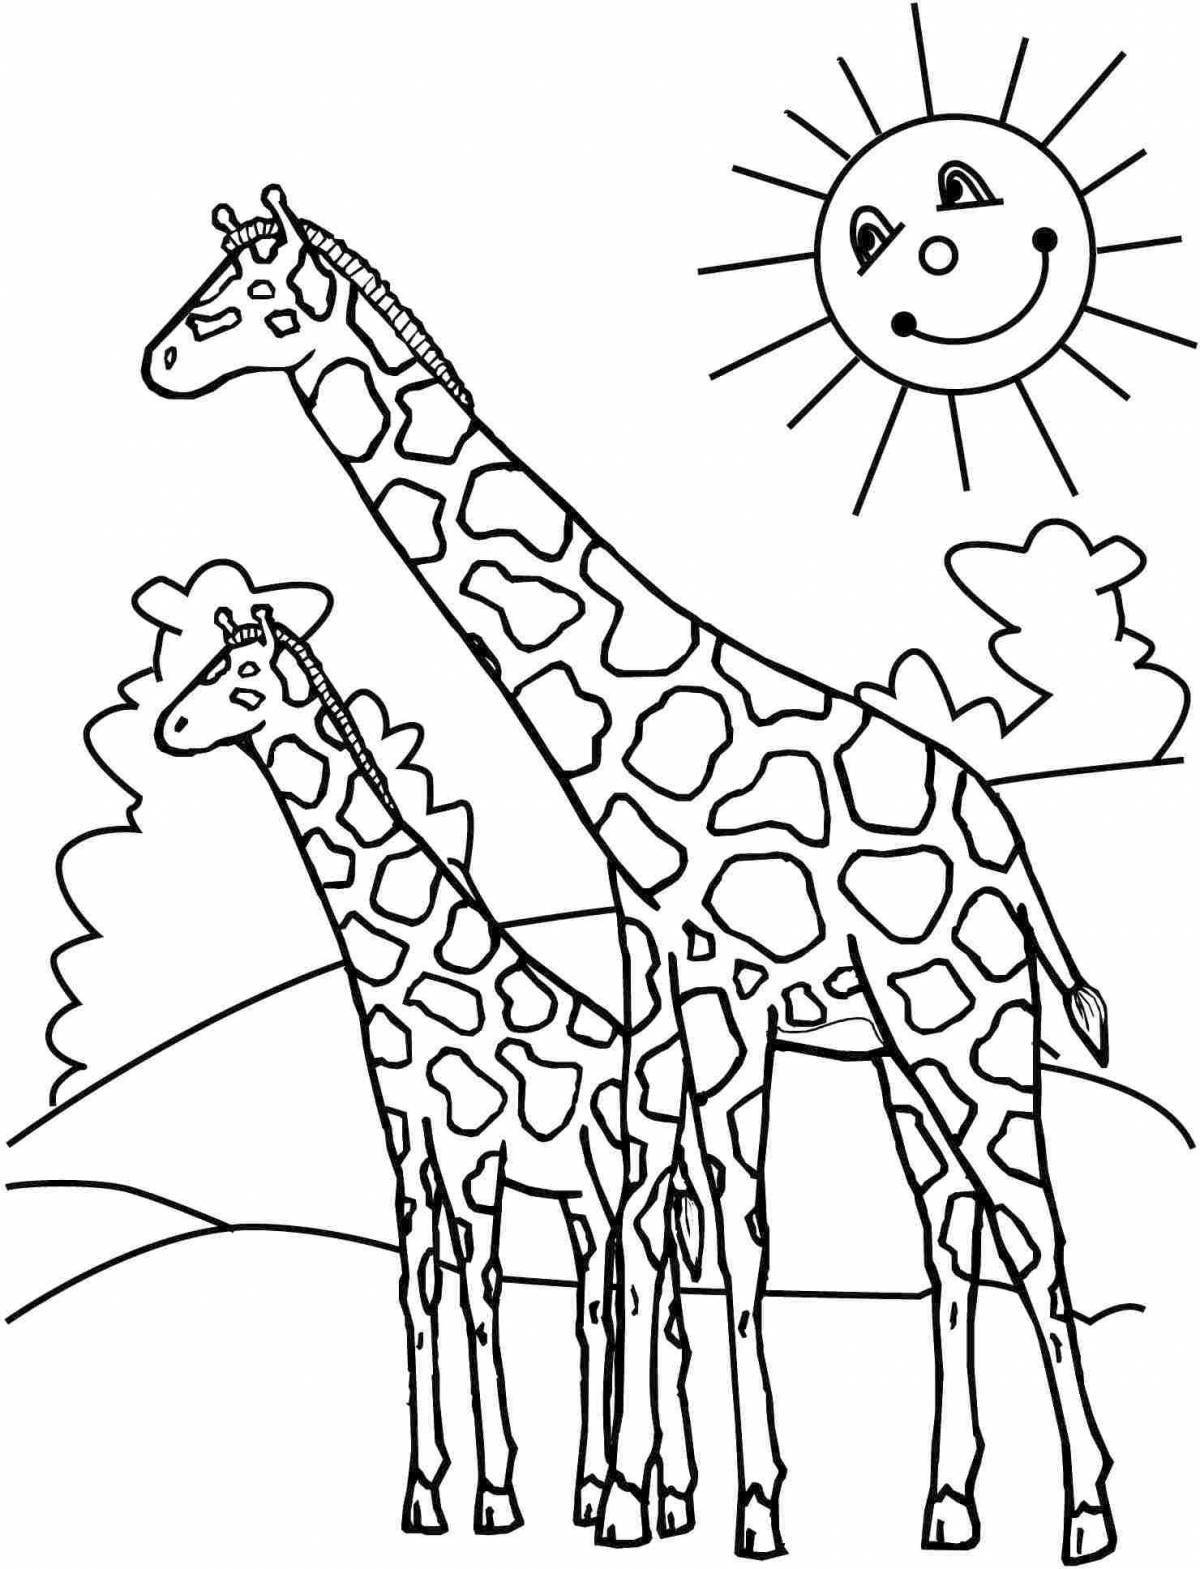 Charming africa coloring book for kids